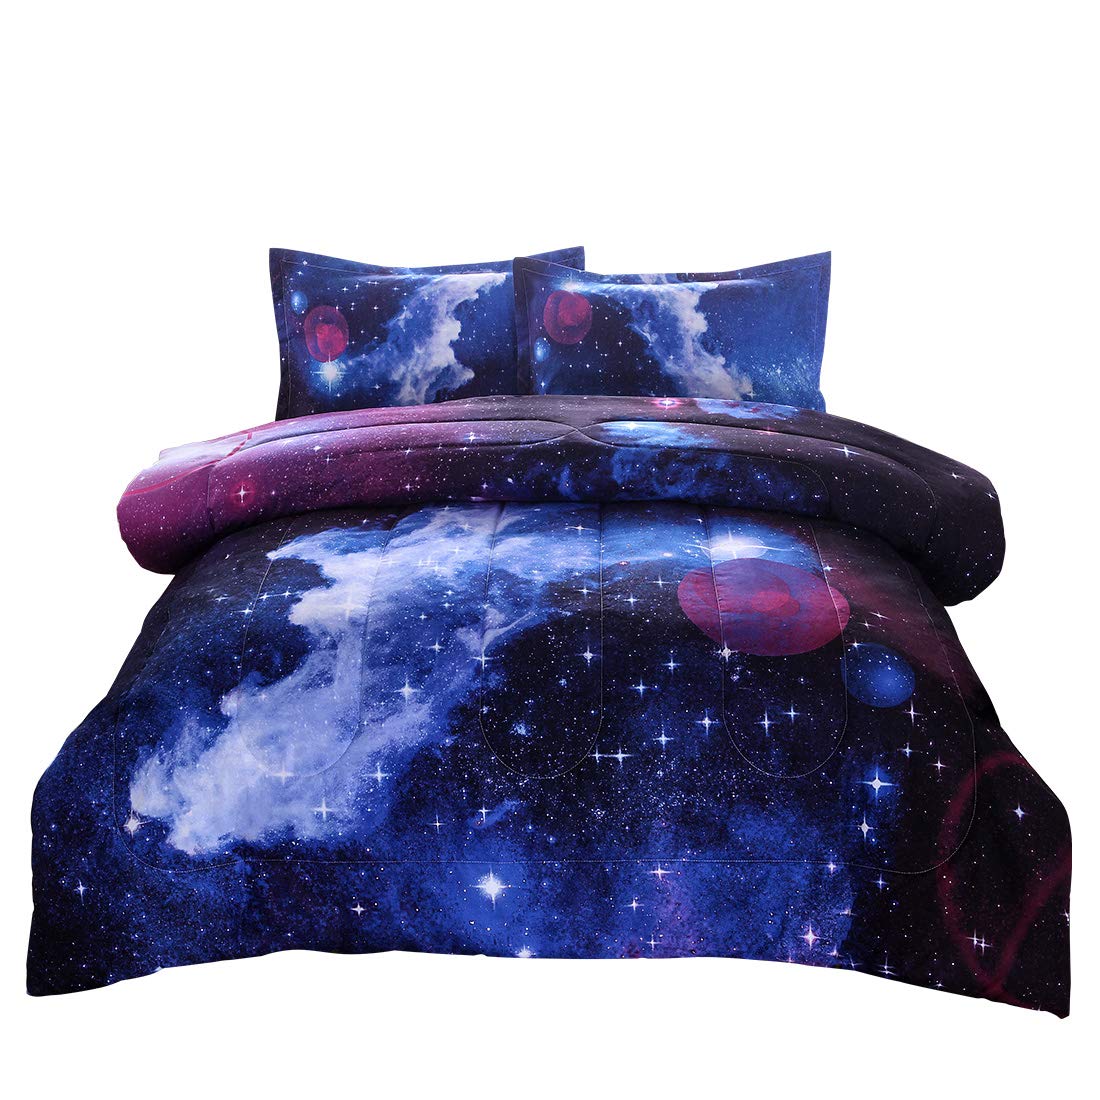 Book Cover JQinHome Full 3-Piece Galaxy Comforter Sets - 3D Outer Space Themed - All-Season Down Alternative Quilted Duvet - Reversible Design - Includes 1 Comforter, 2 Pillow Shams (Dark Blue) Full(3pc) Dark Blue